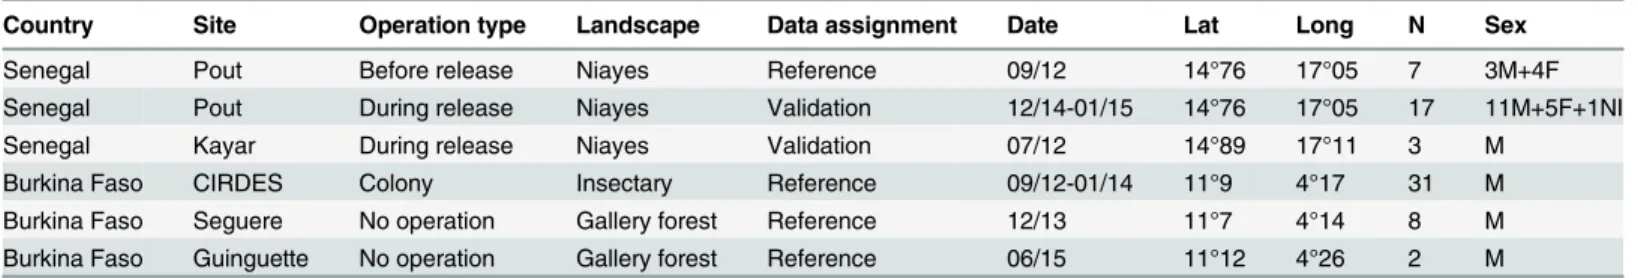 Table 1. Characteristics of analyzed samples of G. p. gambiensis from various countries and sites.